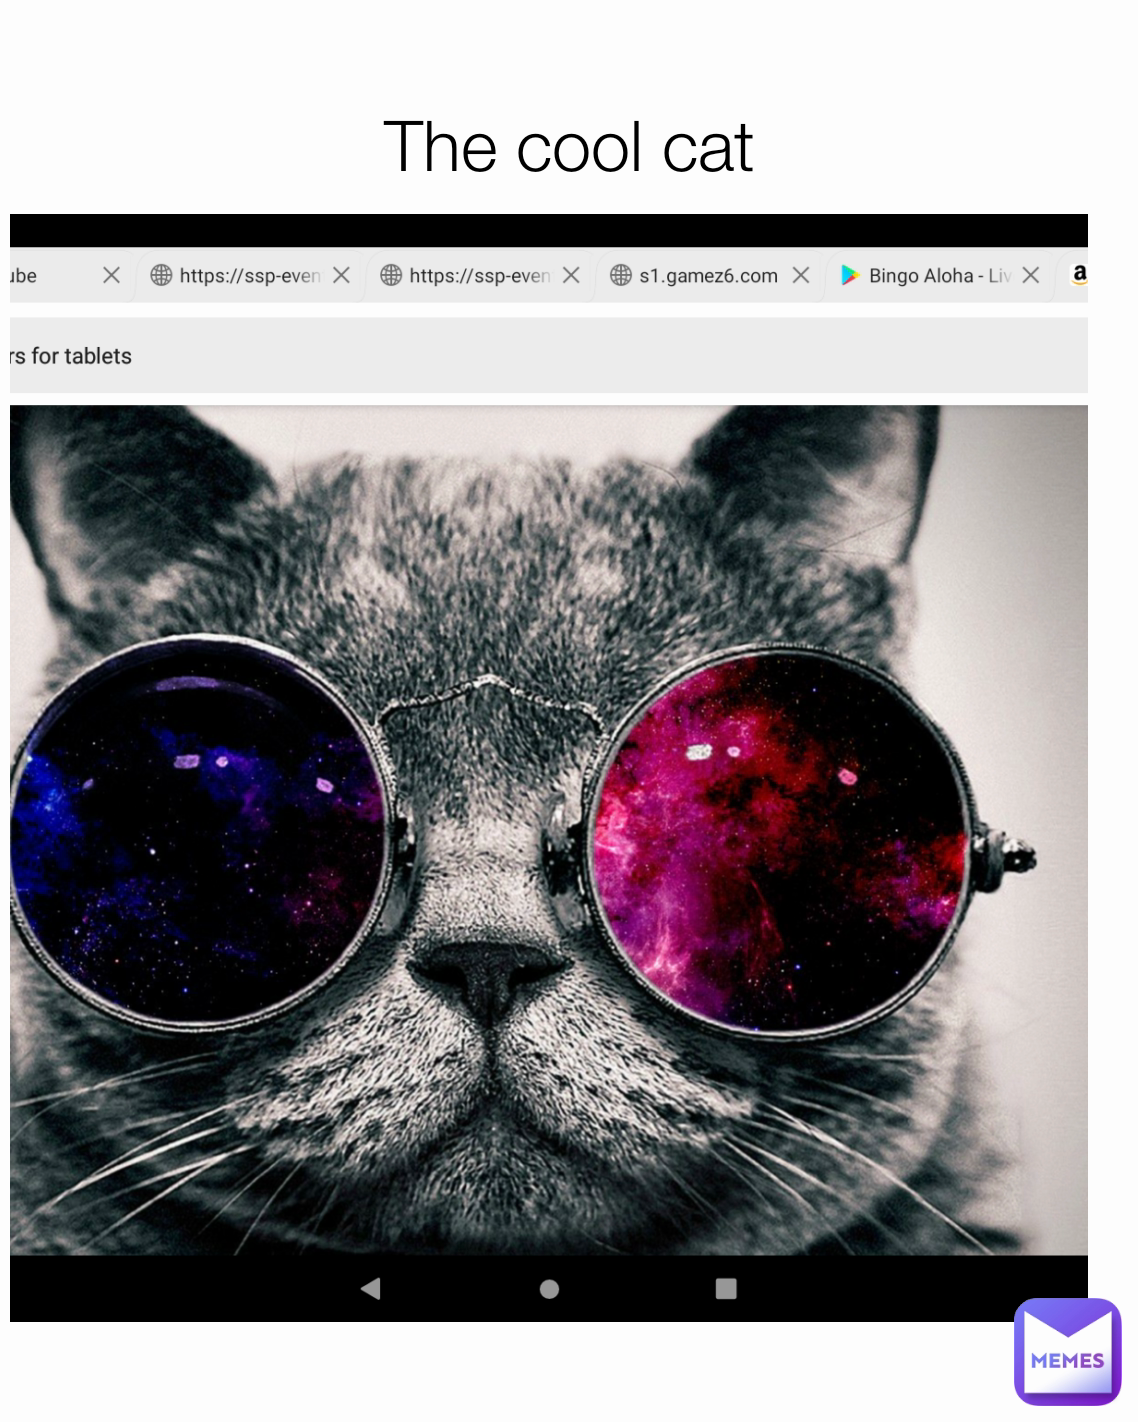 The cool cat